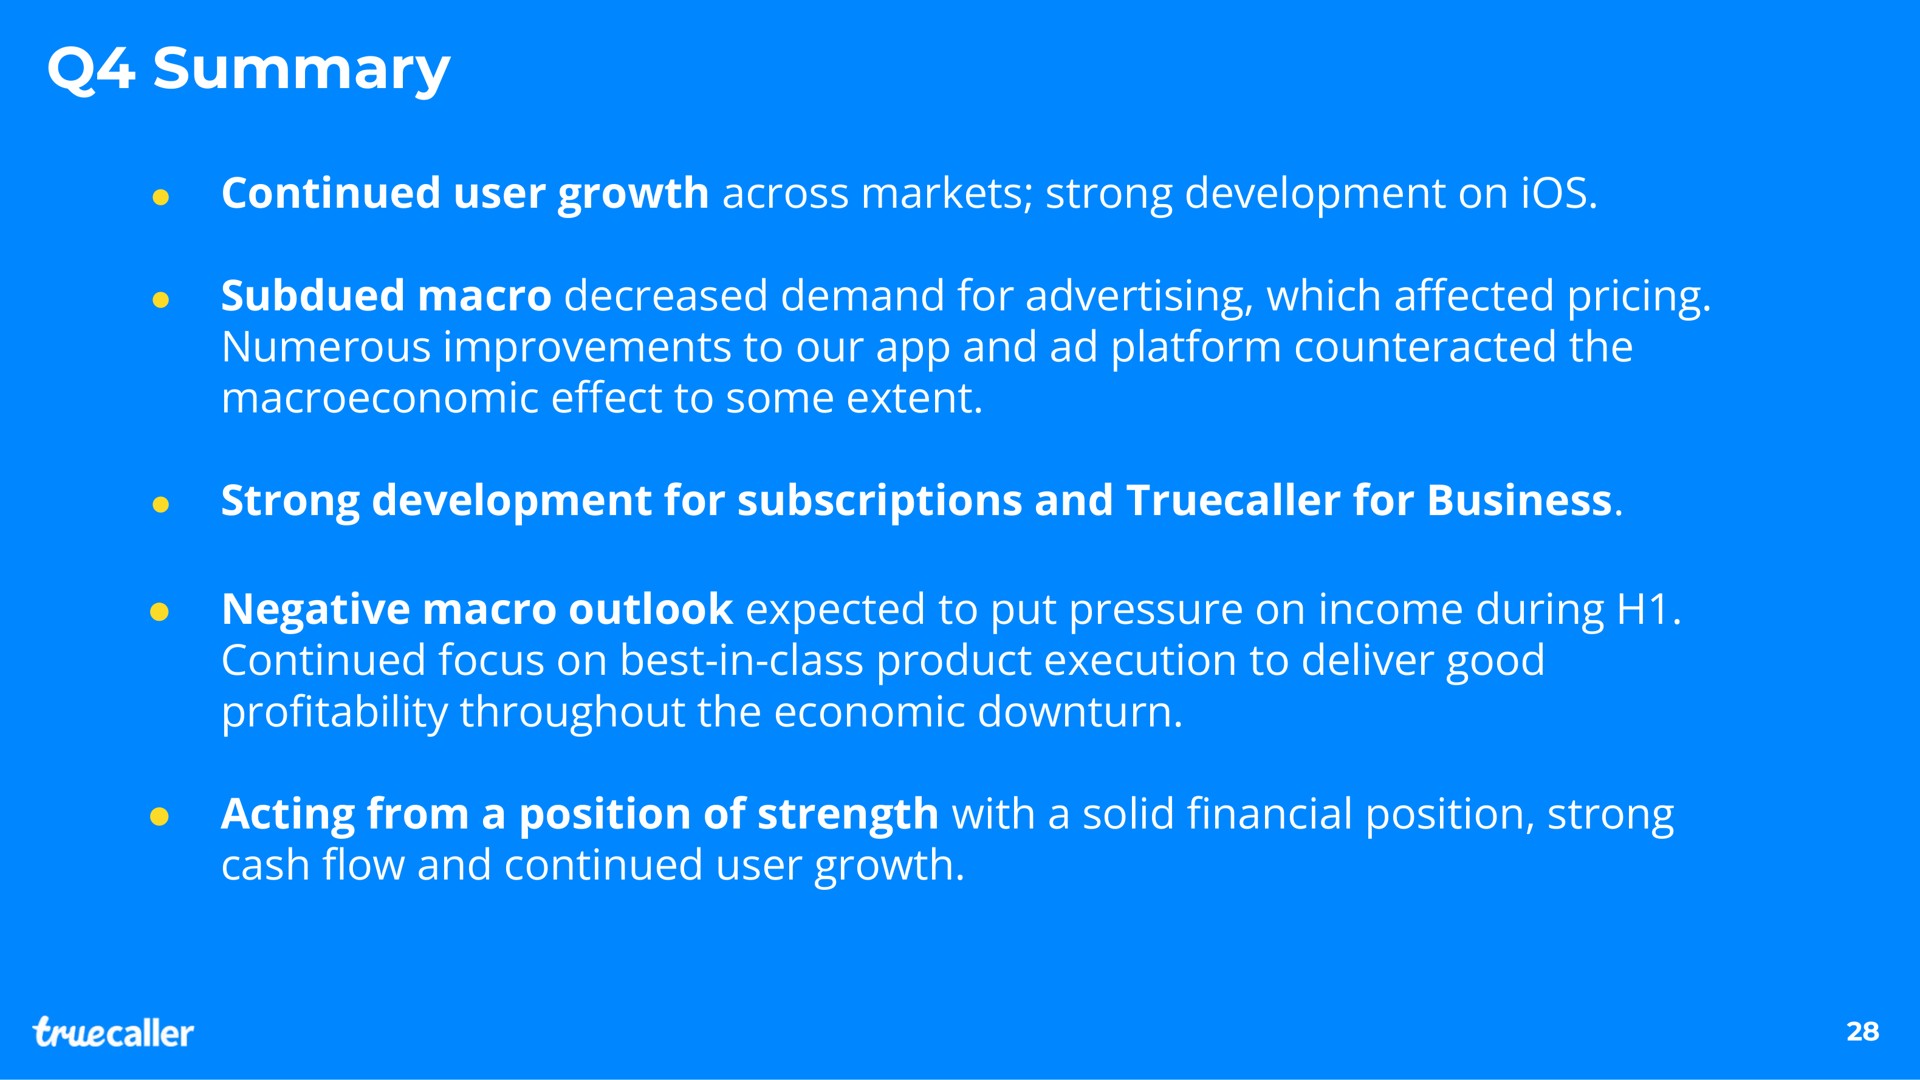 summary continued user growth across markets strong development on ios subdued macro decreased demand for advertising which a pricing numerous improvements to our and platform counteracted the to some extent strong development for subscriptions and for business negative macro outlook expected to put pressure on income during continued focus on best in class product execution to deliver good pro throughout the economic downturn acting from a position of strength with a solid position strong cash and continued user growth affected effect profitability financial flow | Truecaller